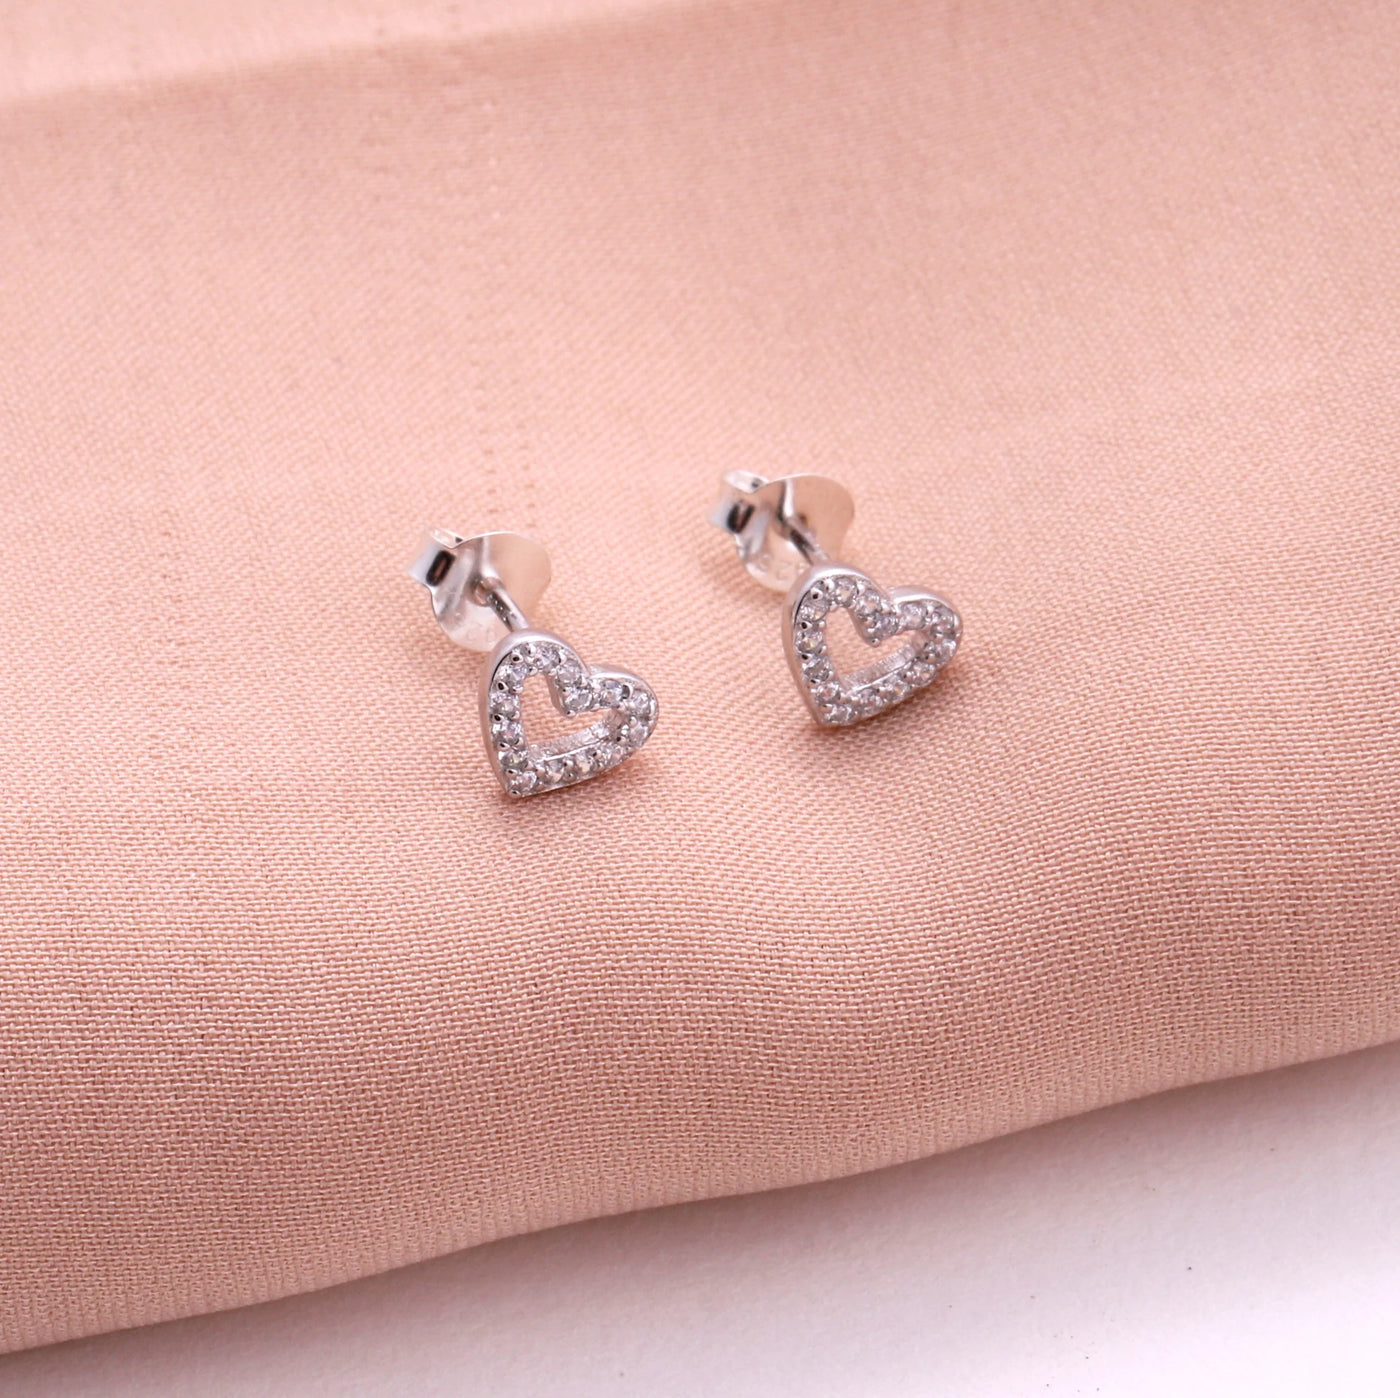 Marvellous Mum - Message in a Bottle - Pave Crystal Heart Stud Earrings - Sterling Silver